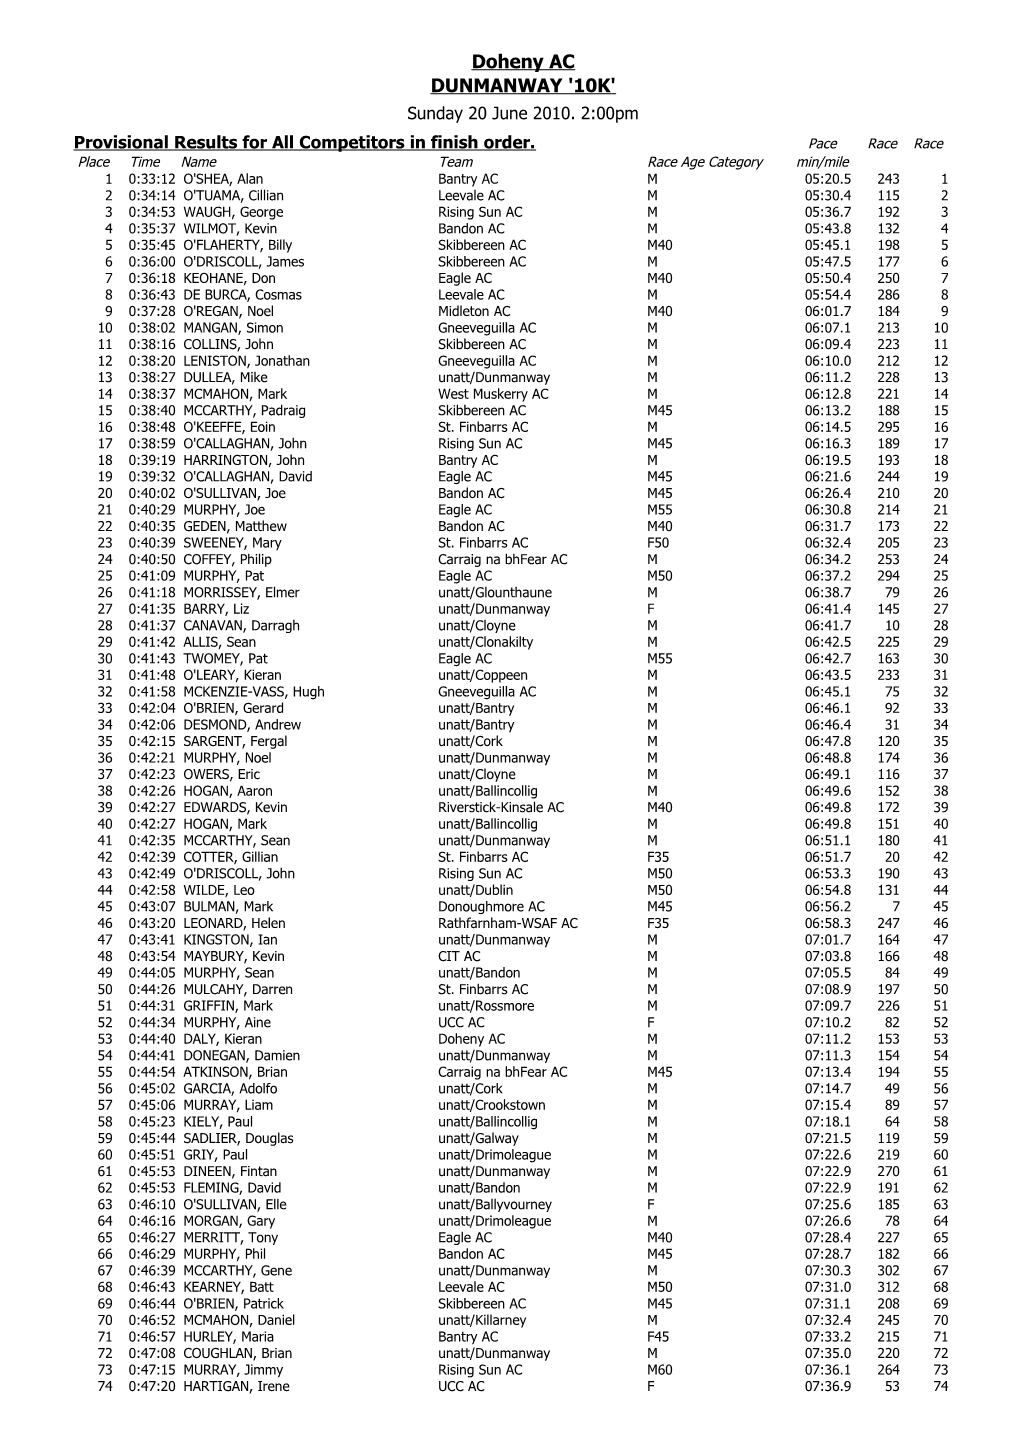 Provisional Results for All Competitors in Finish Order. Pace Race Race